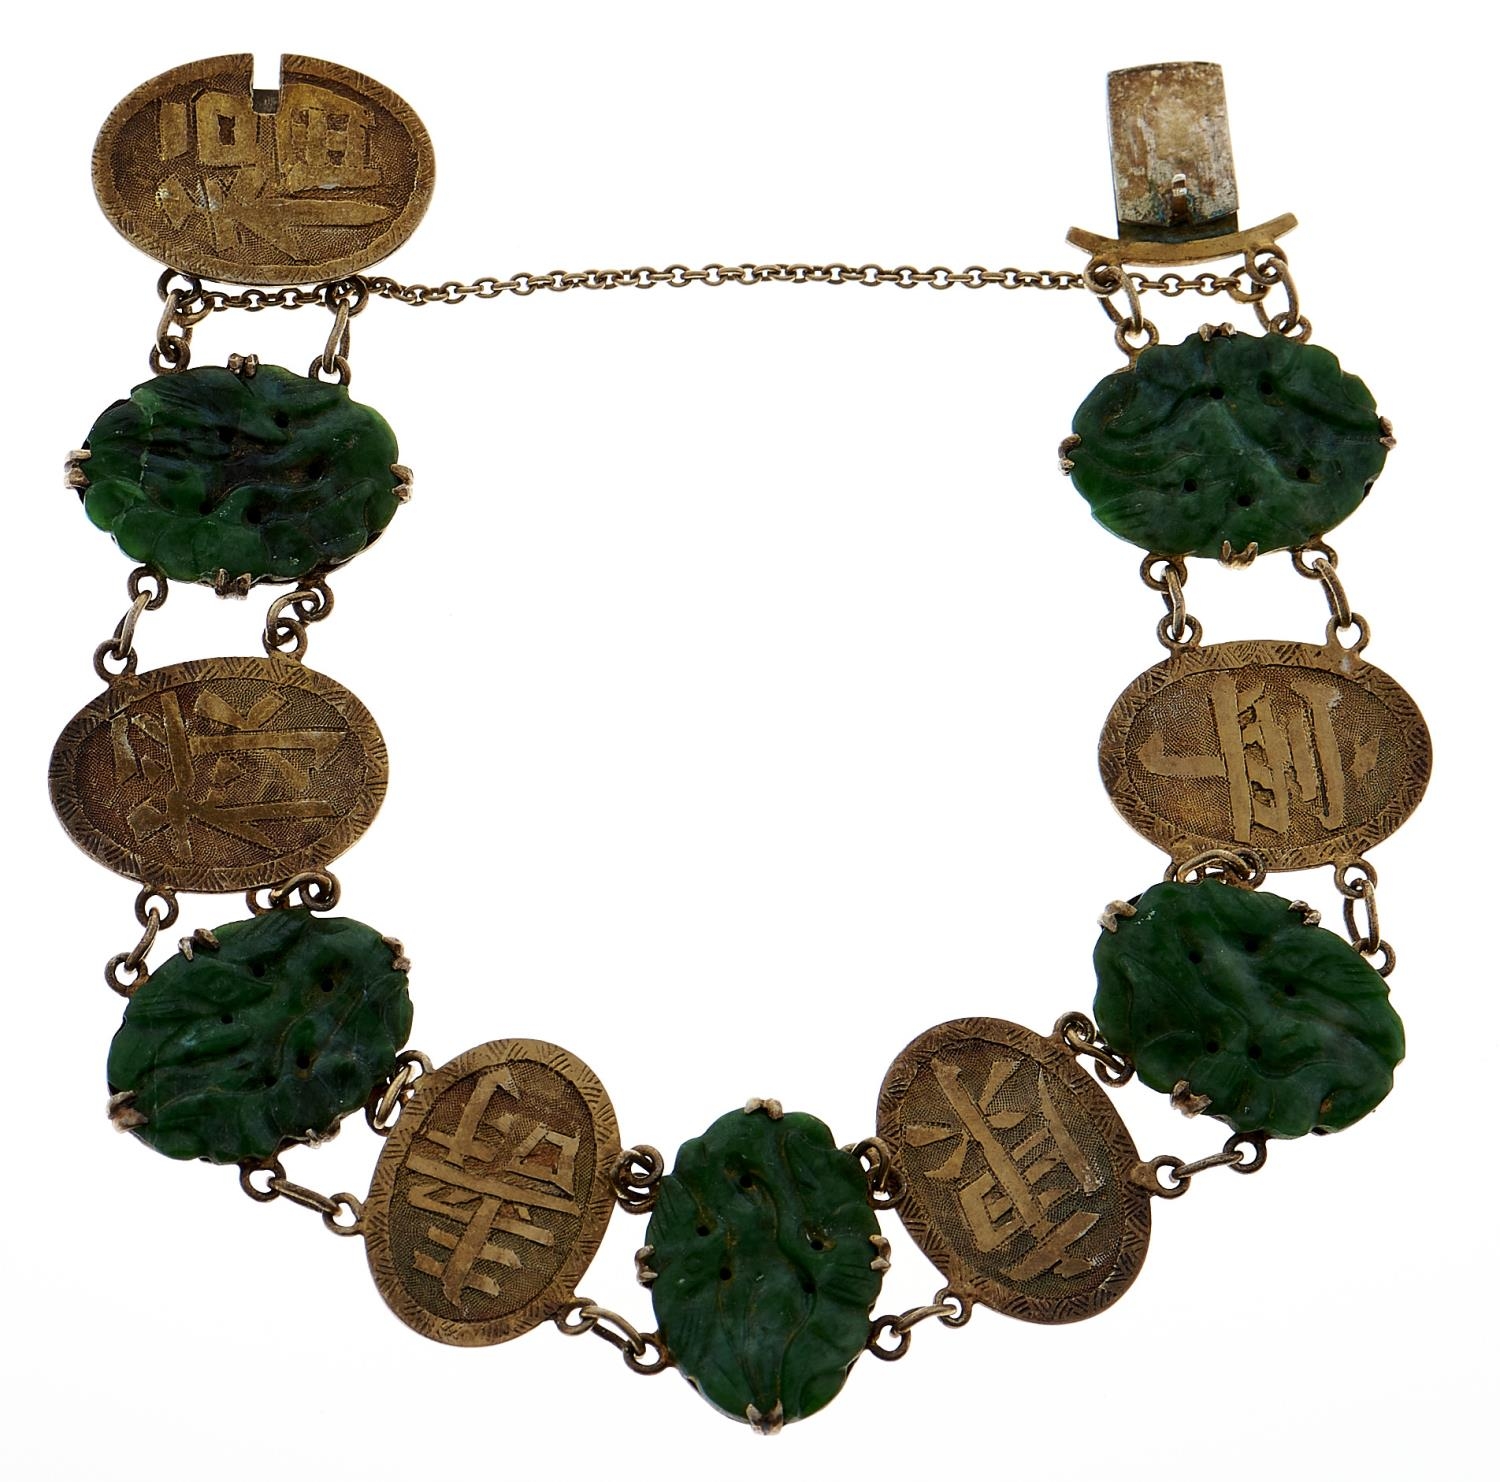 A Chinese carved jade mounted gold bracelet, early 20th c, with alternate panels of shou